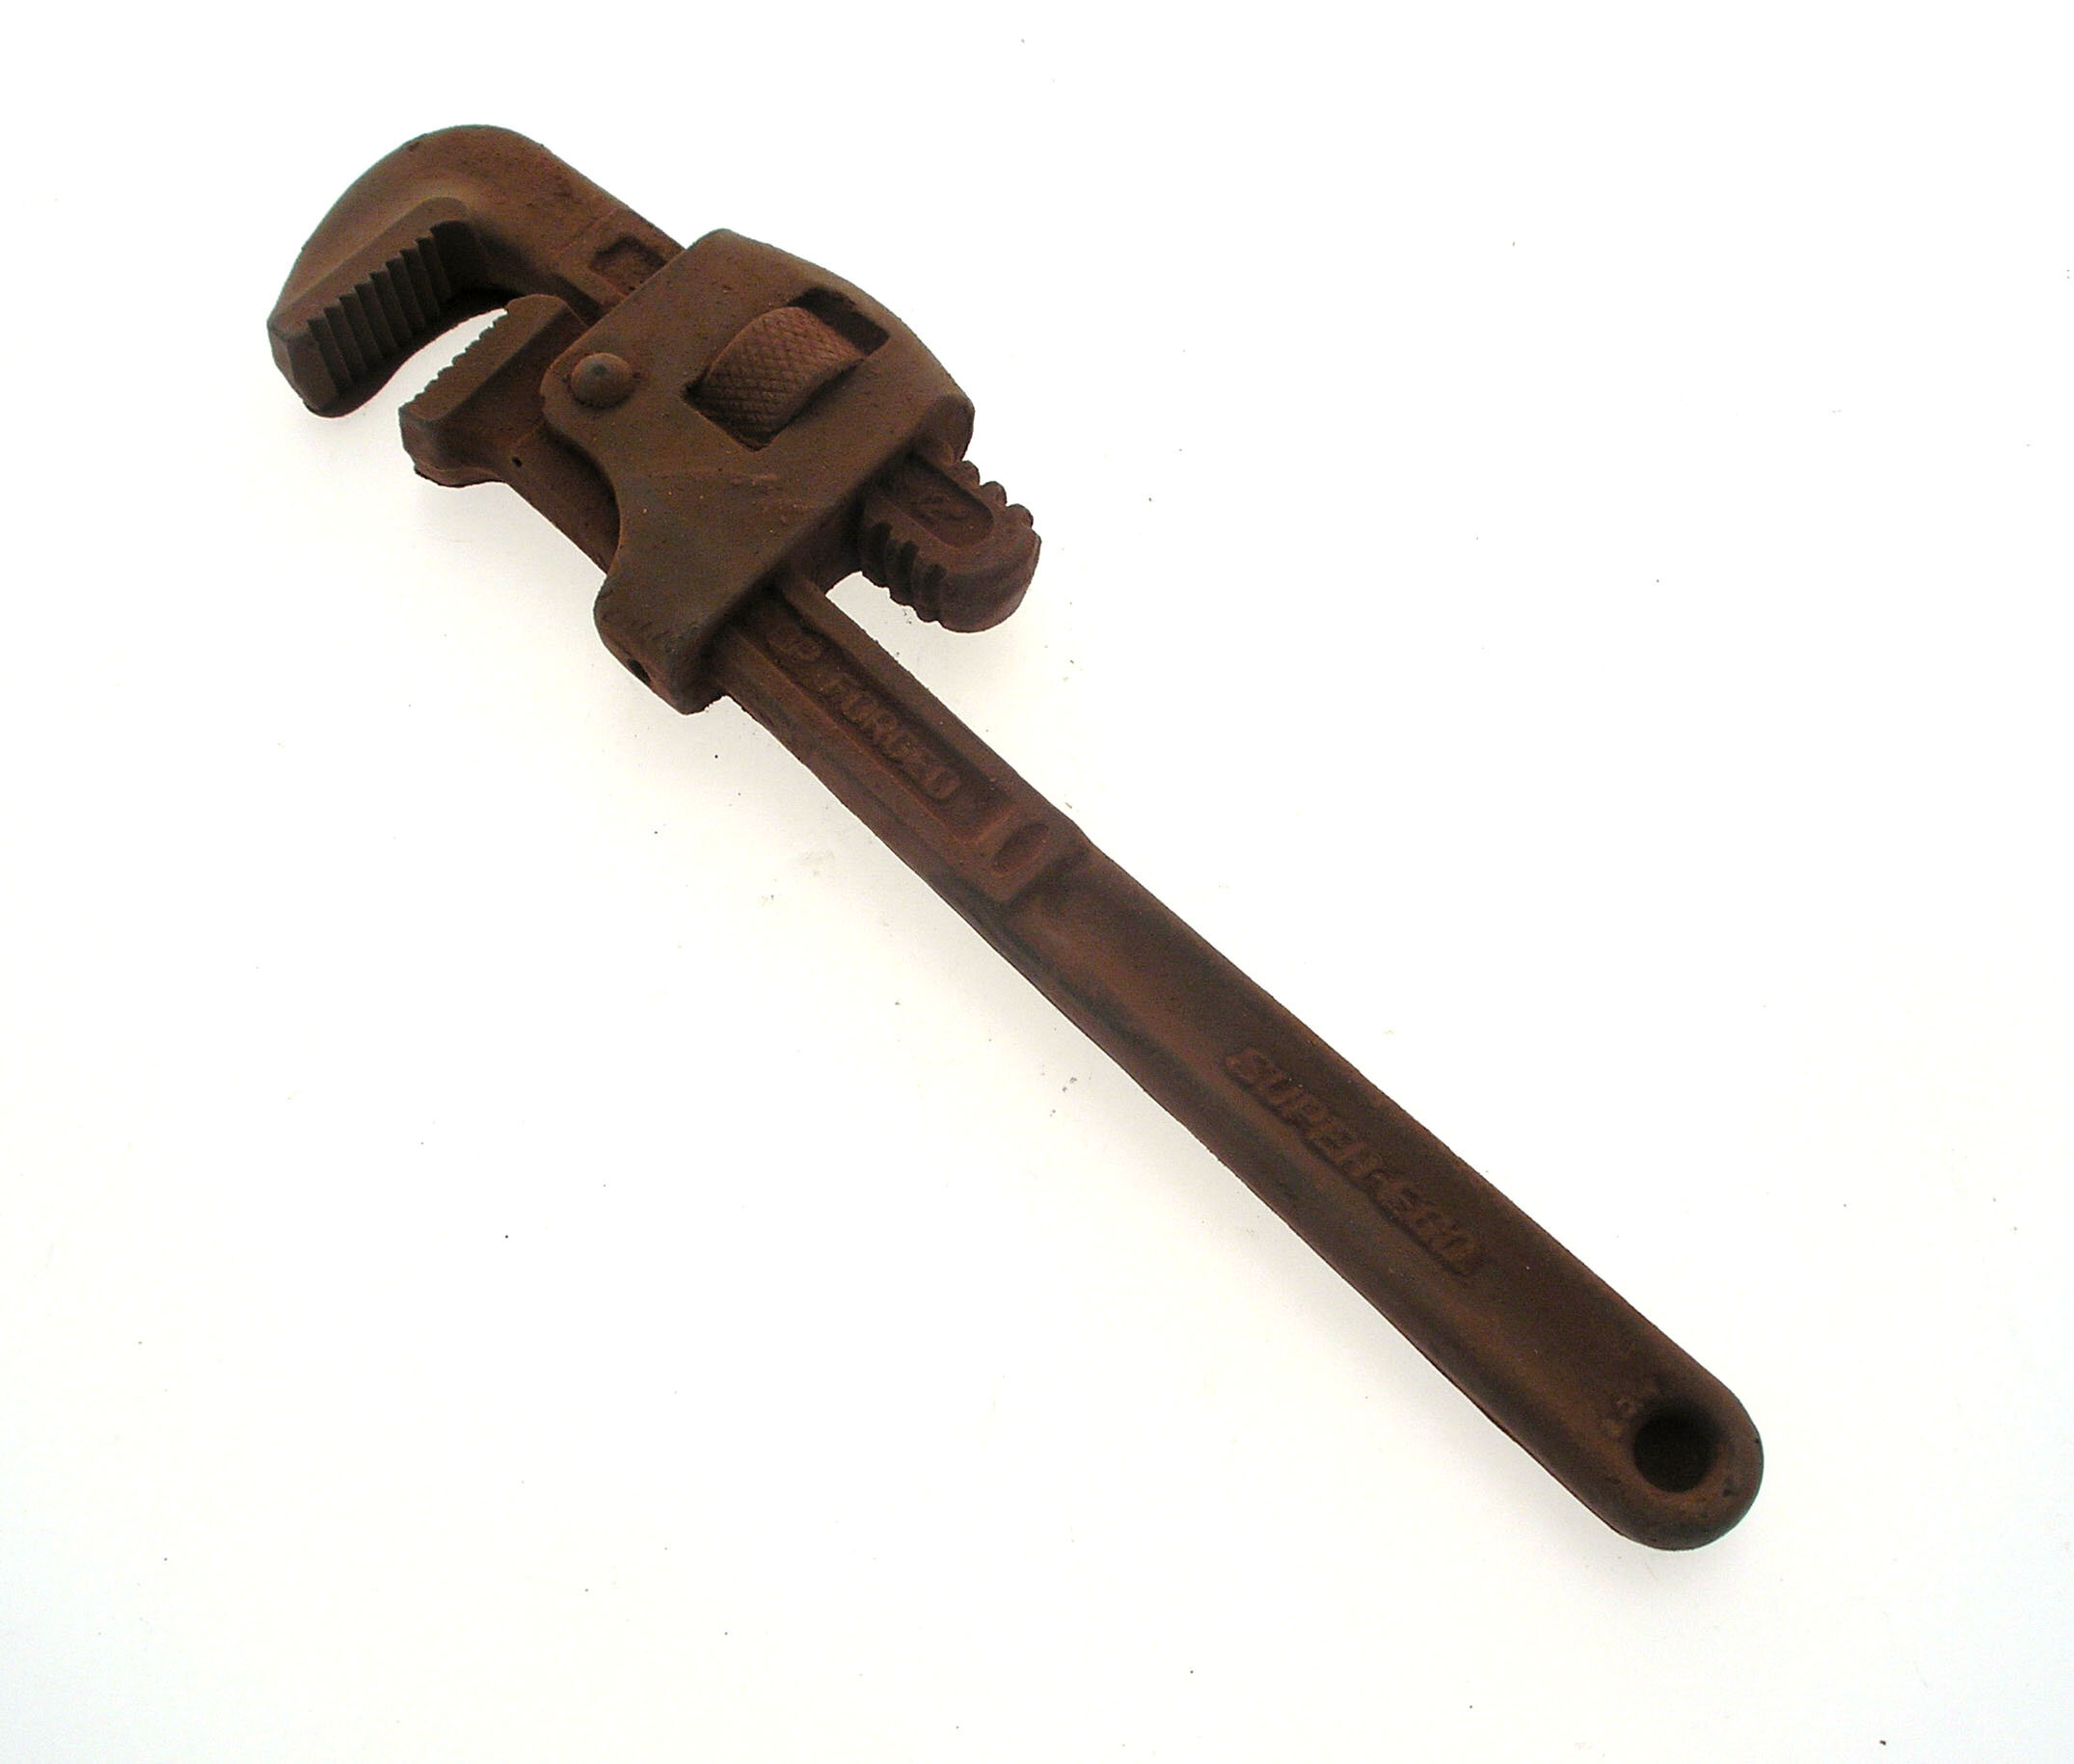 02523 #pipe wrench